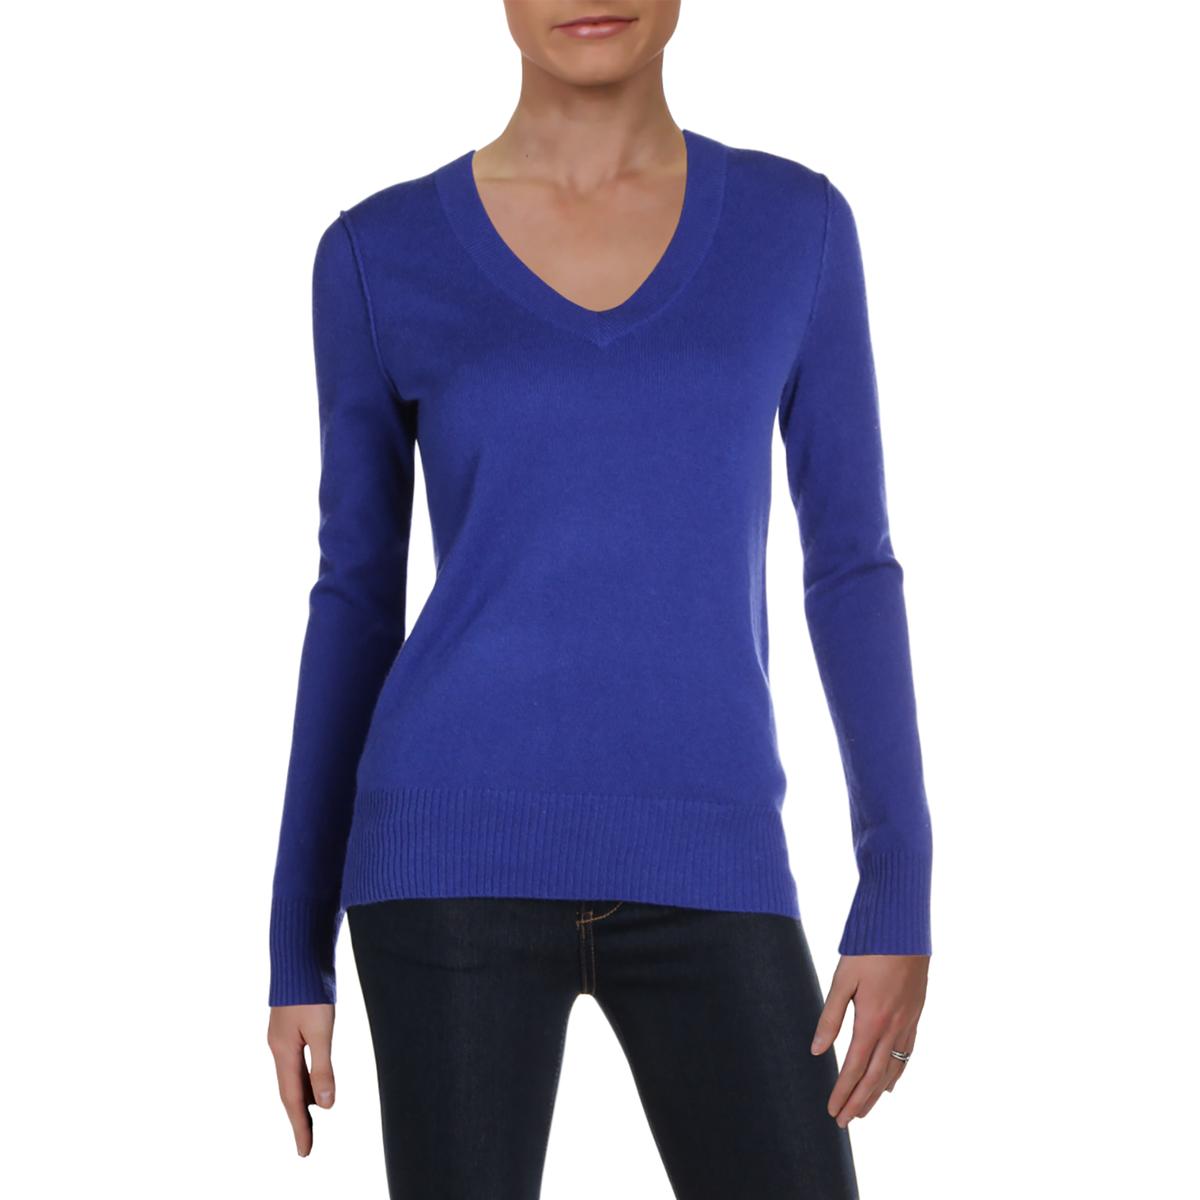 Aqua Womens Blue Cashmere V-Neck Long Sleeve Pullover Sweater Top XS ...